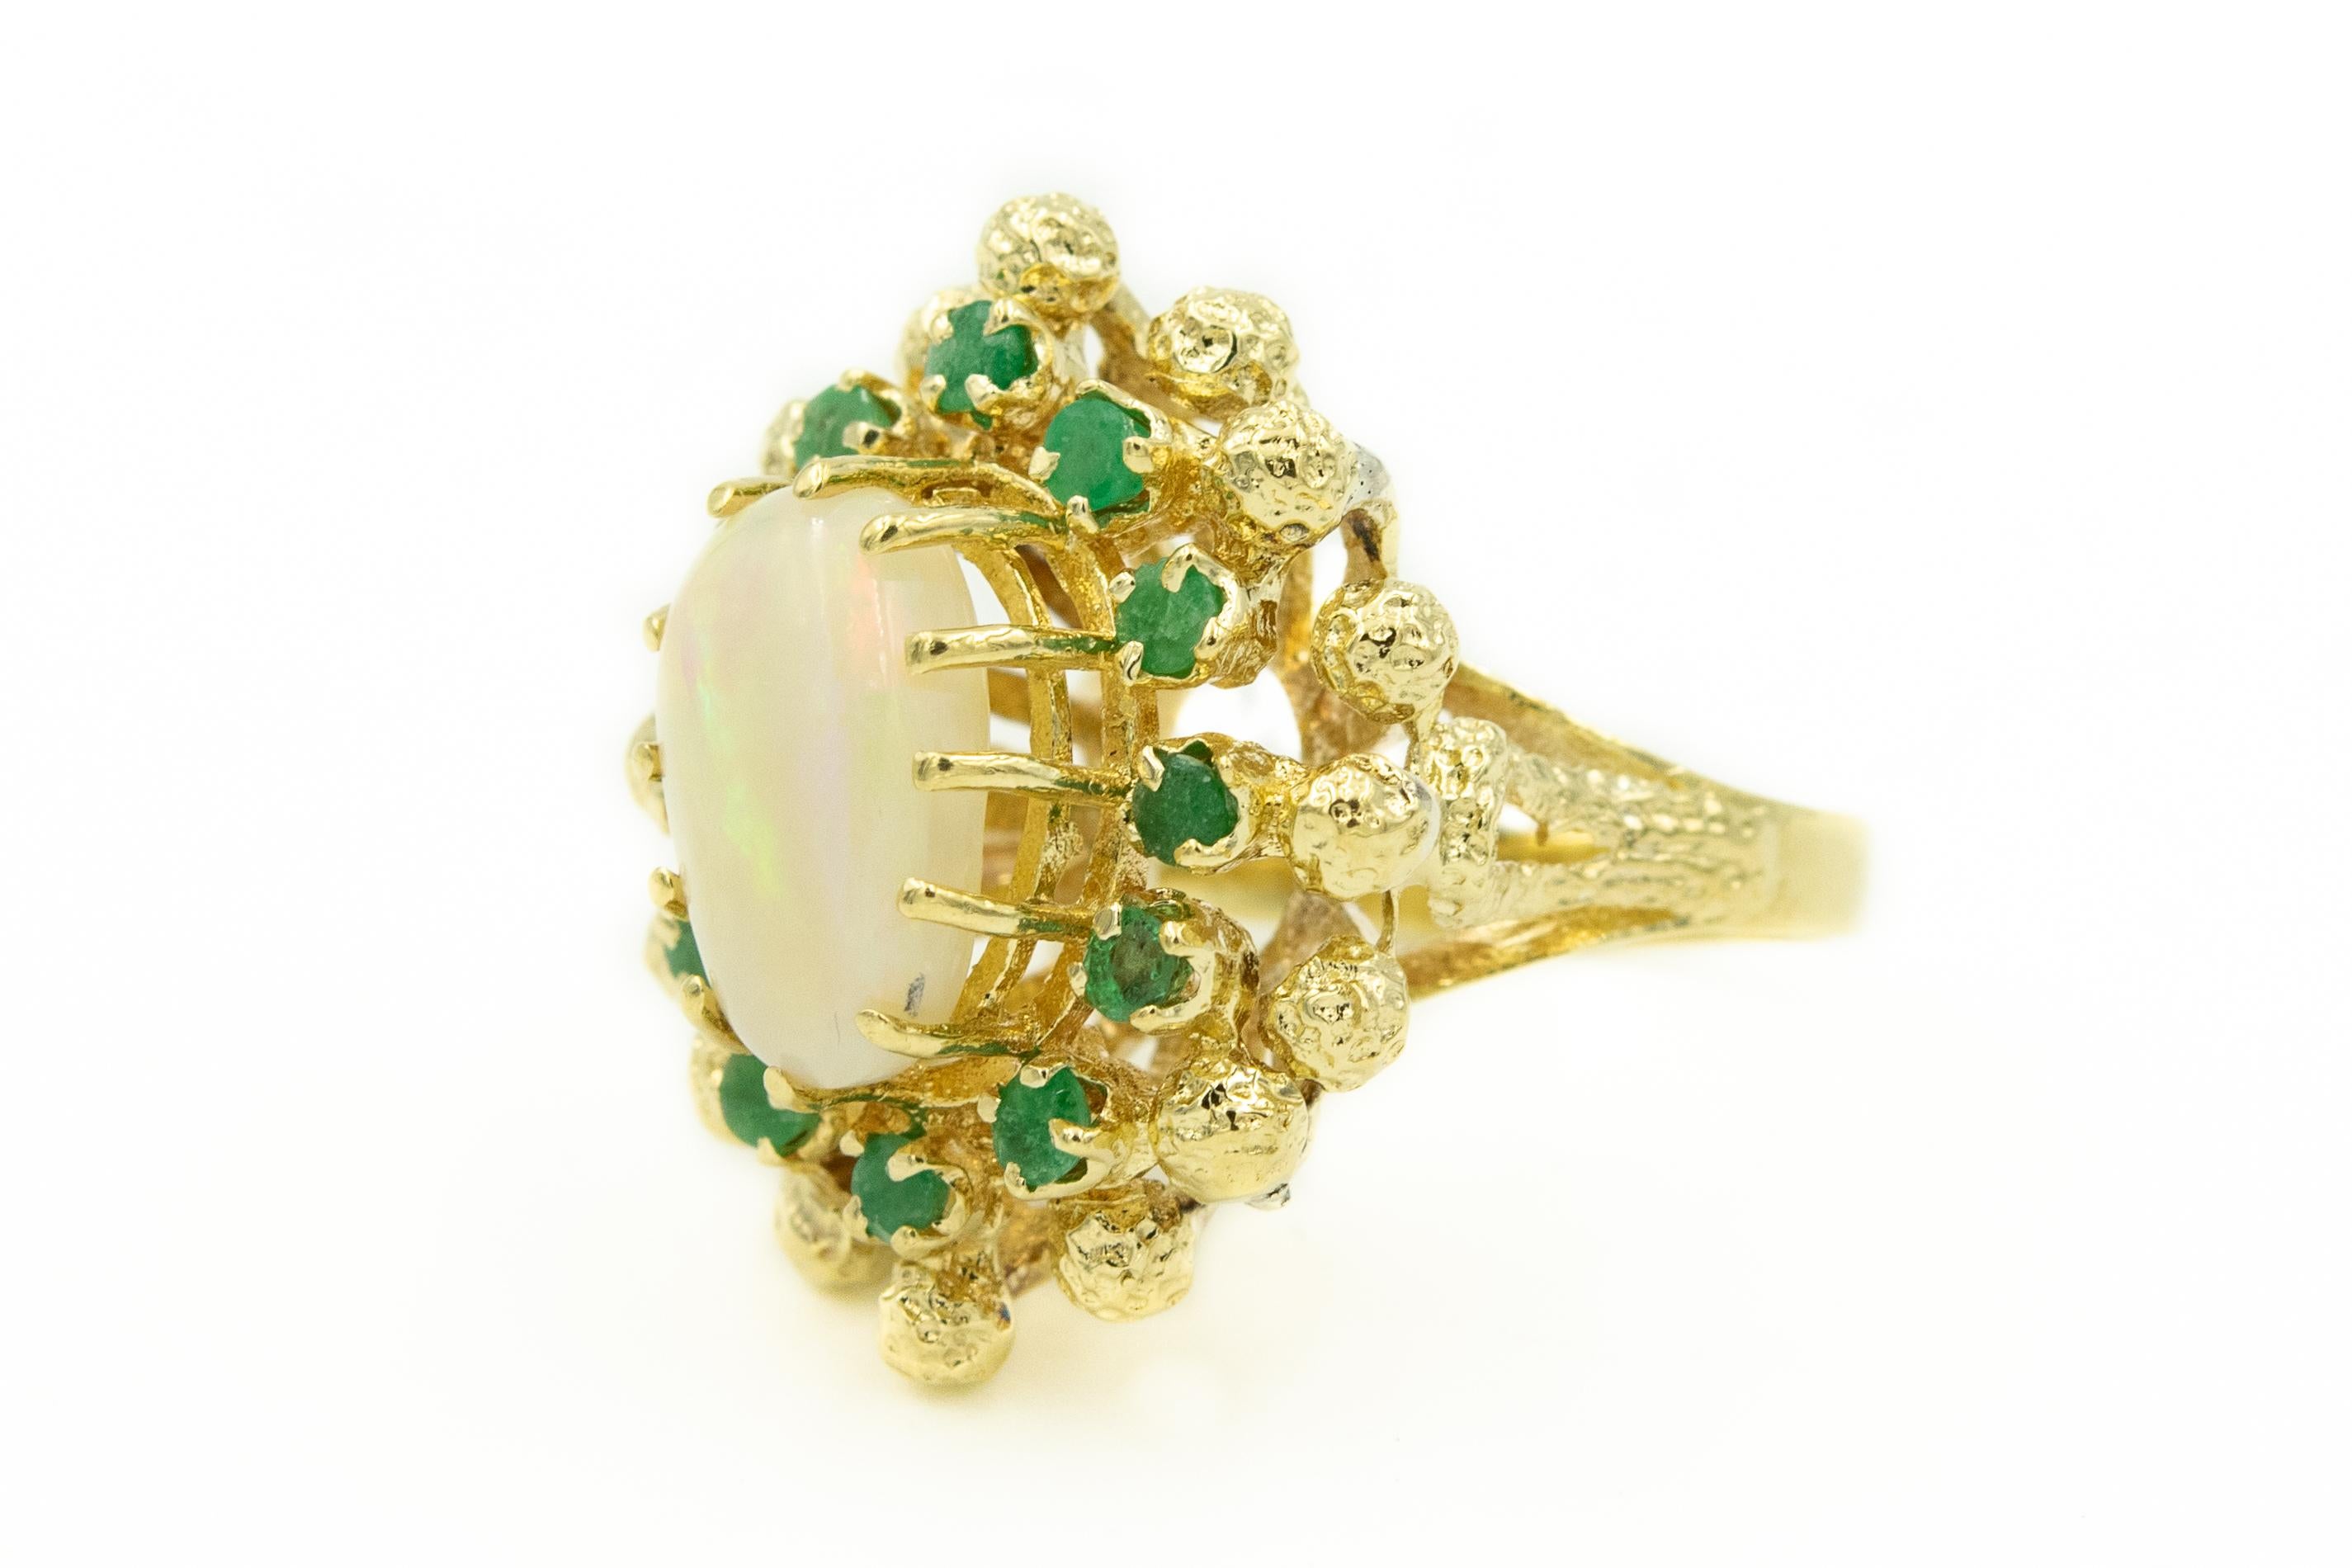 Organic ring from the 1960 - 1970s era, this cluster style ring features an oval opal with a beautiful red, blue, green and yellow flat of color set among 12 prong set emerald with an outer rim of textured balls.  The ring is 14k yellow gold.  

US